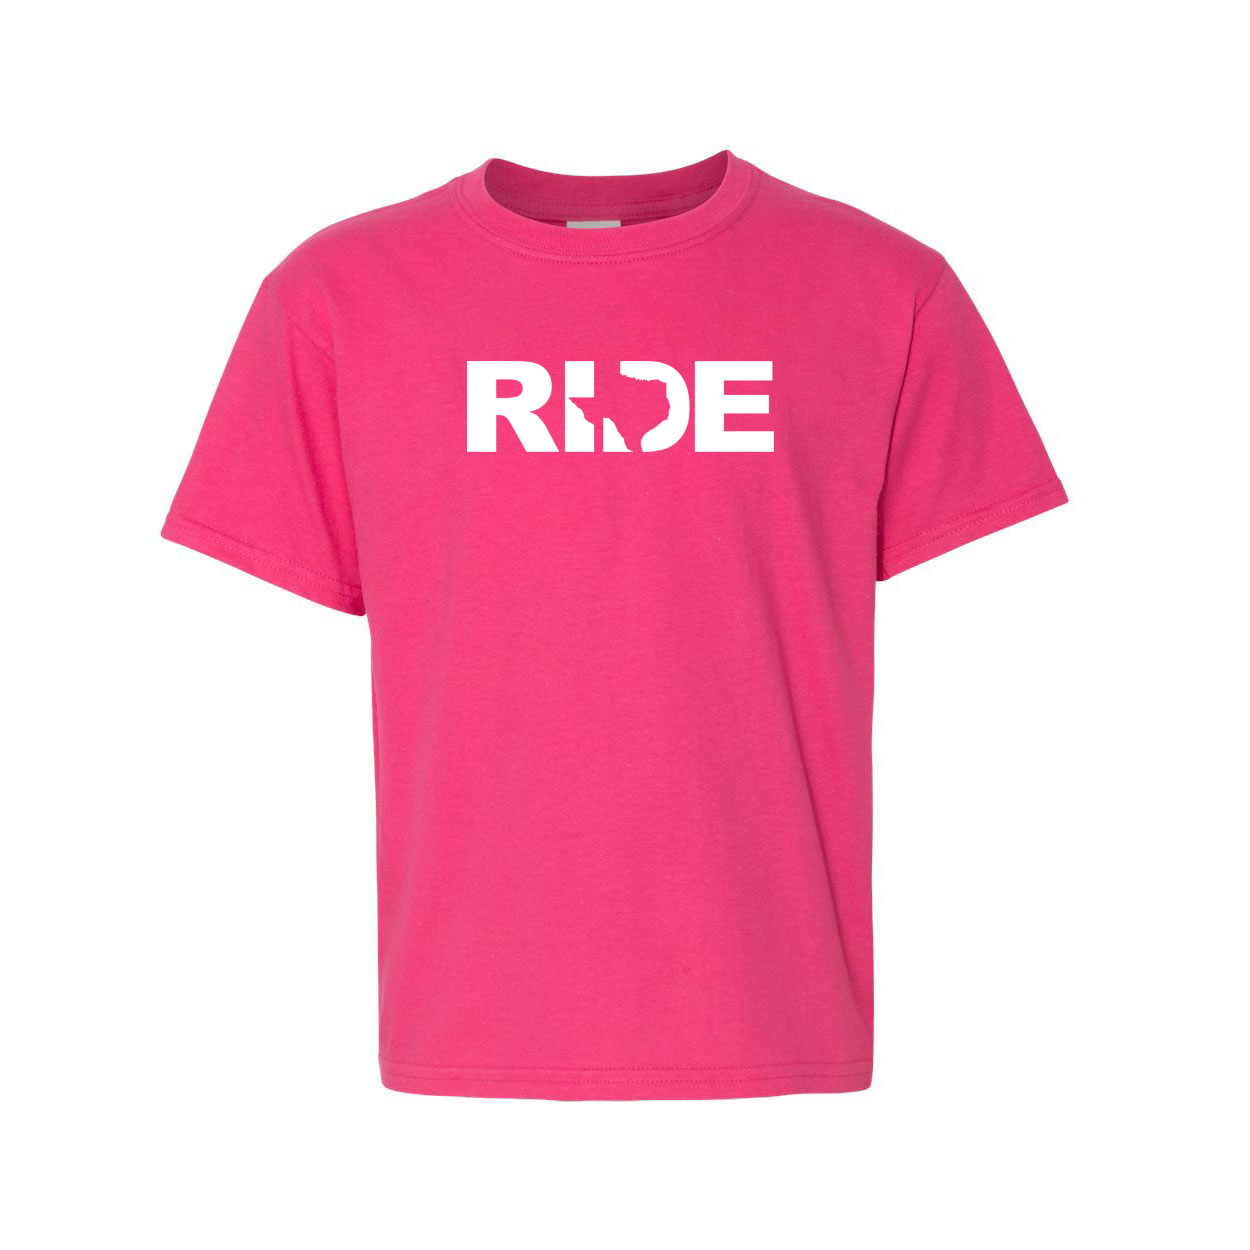 Ride Texas Classic Youth T-Shirt Pink